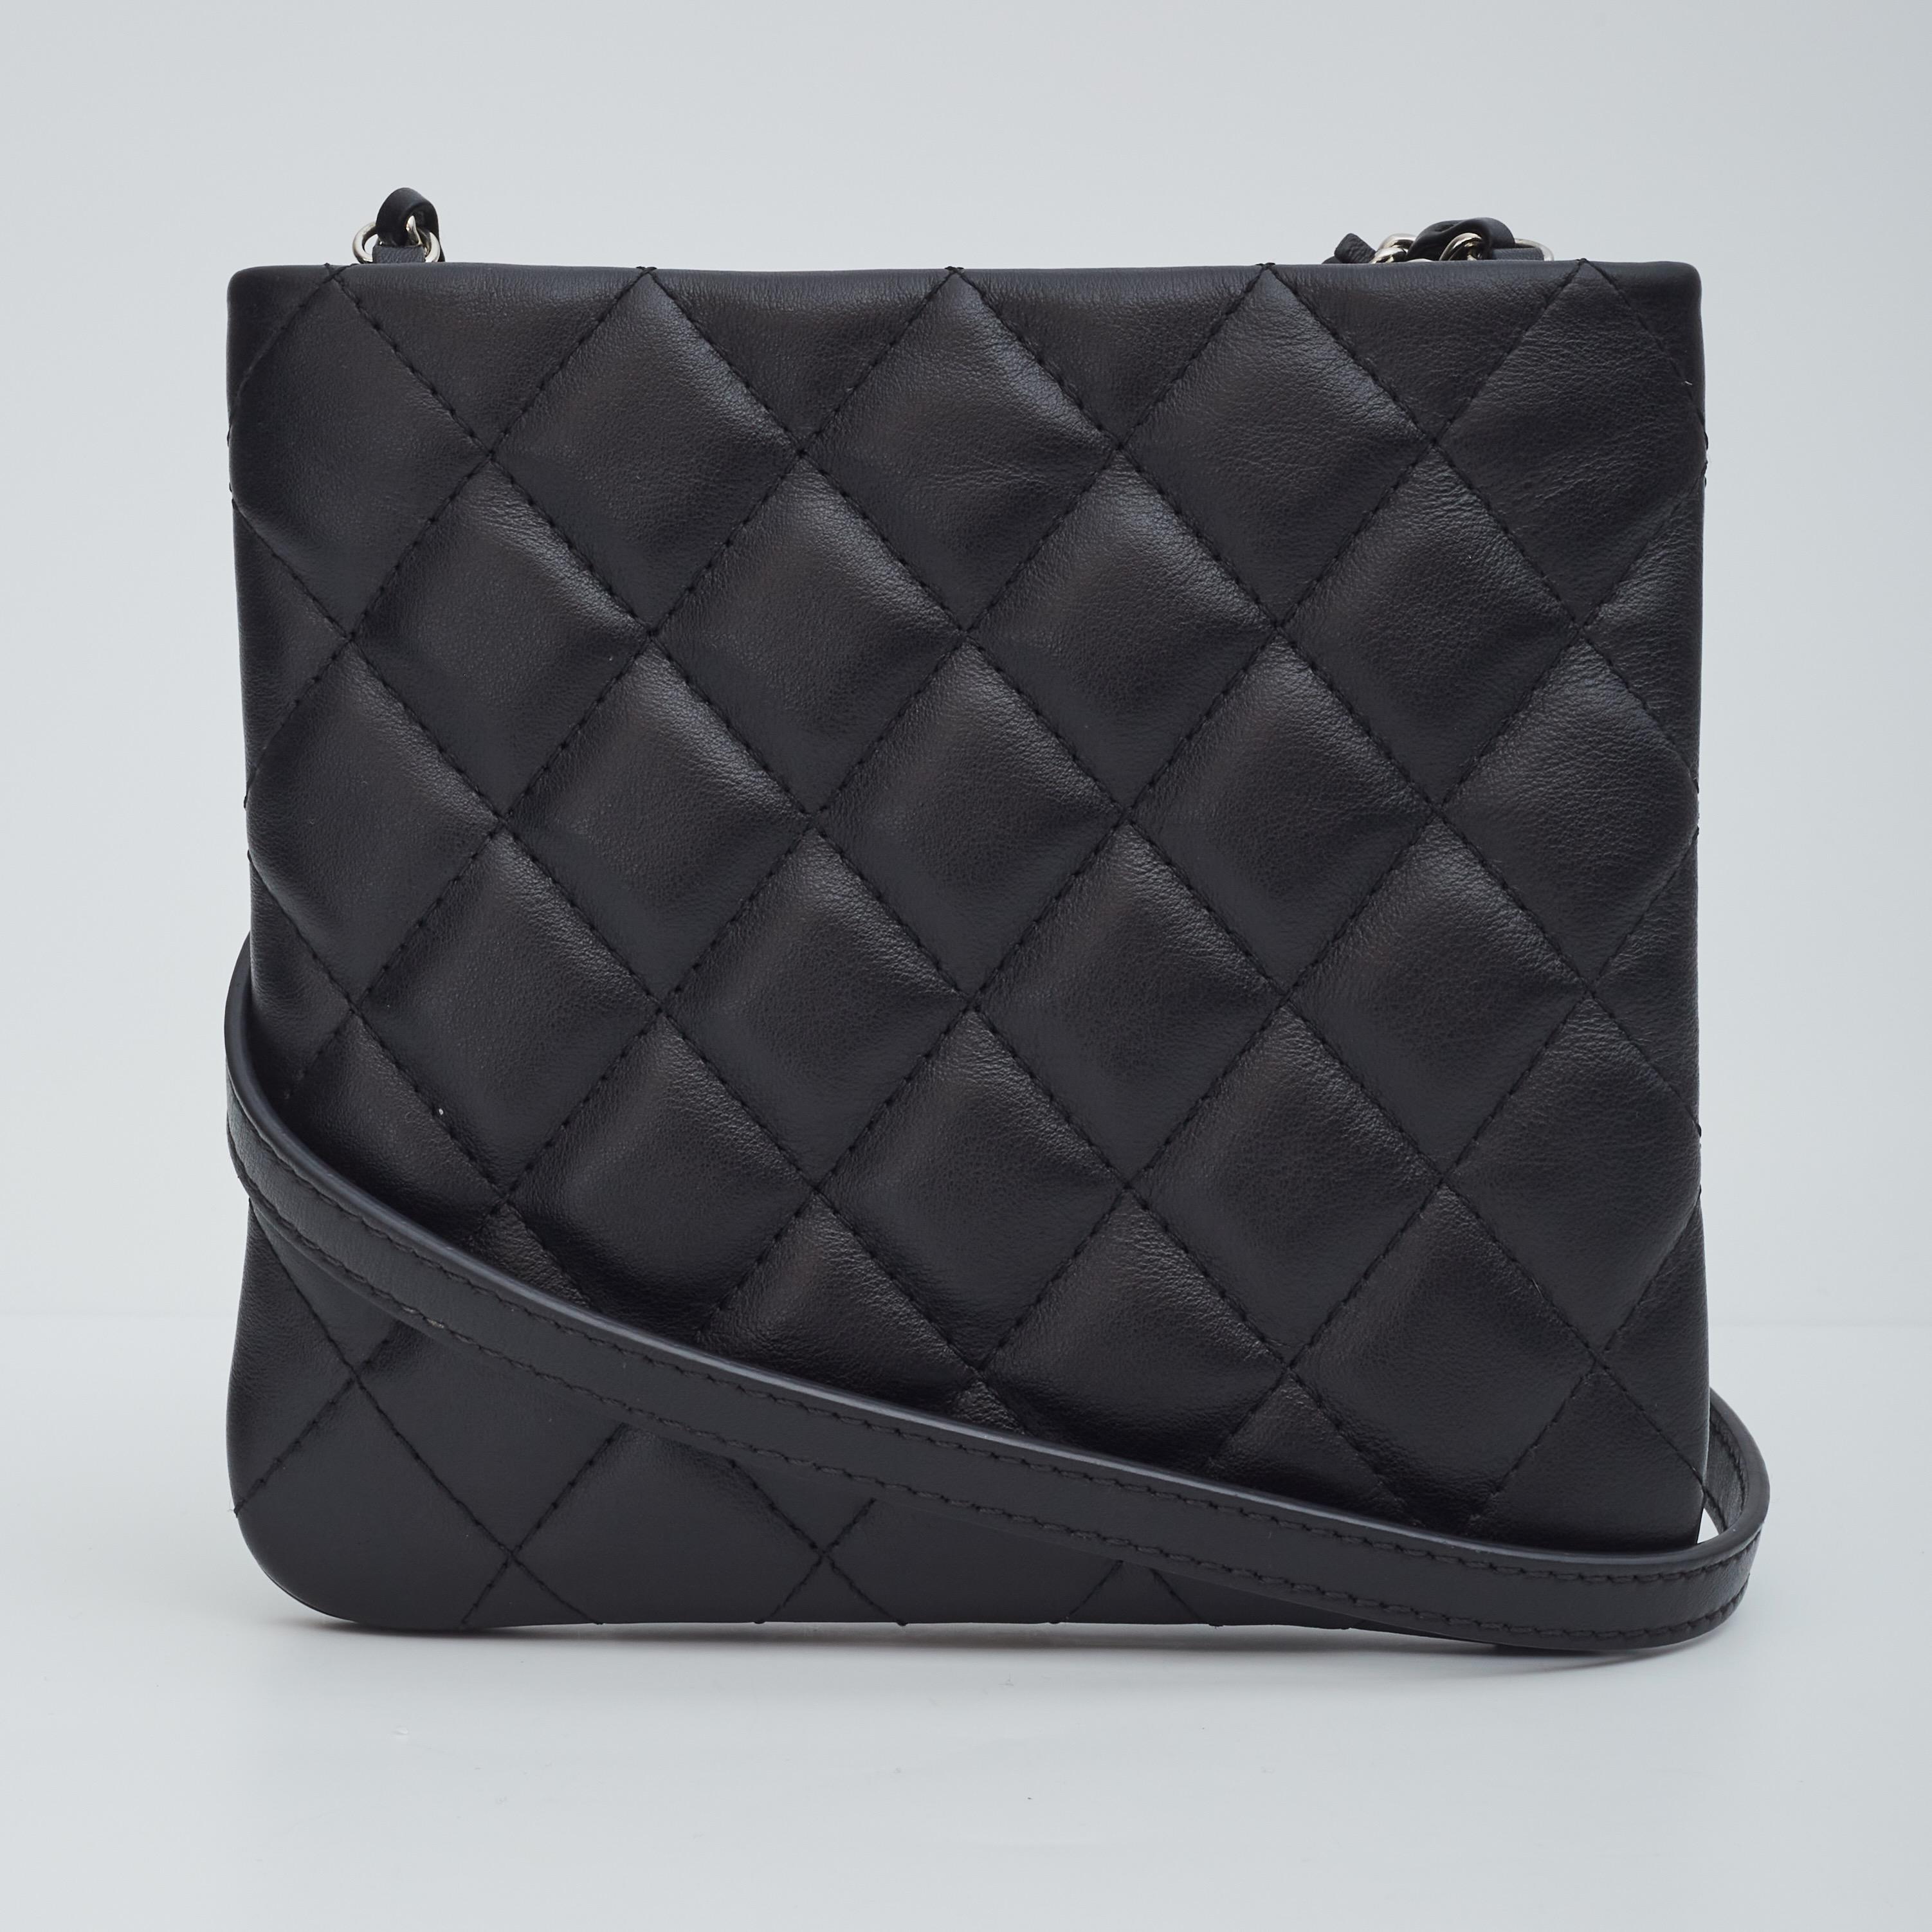 This Chanel crossbody bag made of lambskin leather in black. The bag features a flat design, diamond quilted stitching, a front cc logo, silver hardware and a signature chain and leather shoulder strap. The bag is finished with black woven fabric